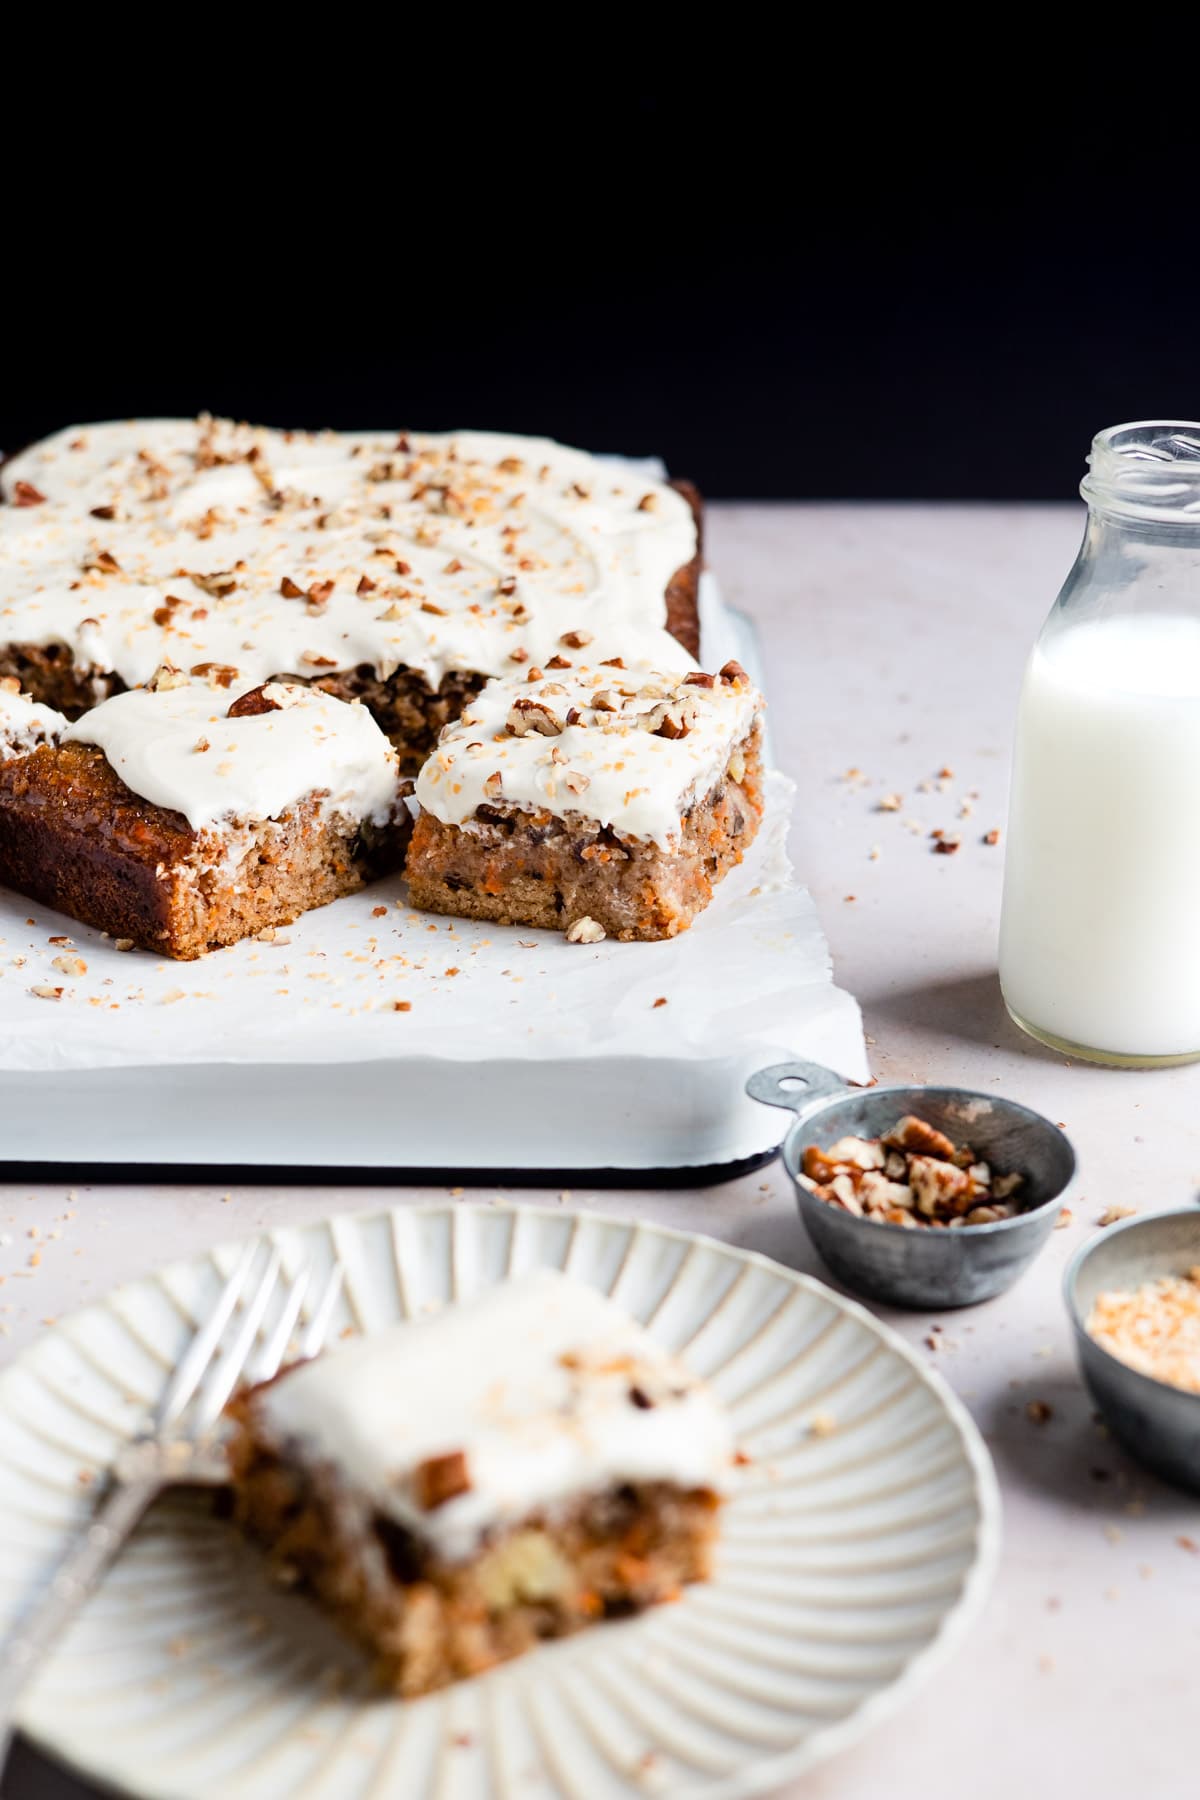 A tray of carrot cake next to a glass of milk.